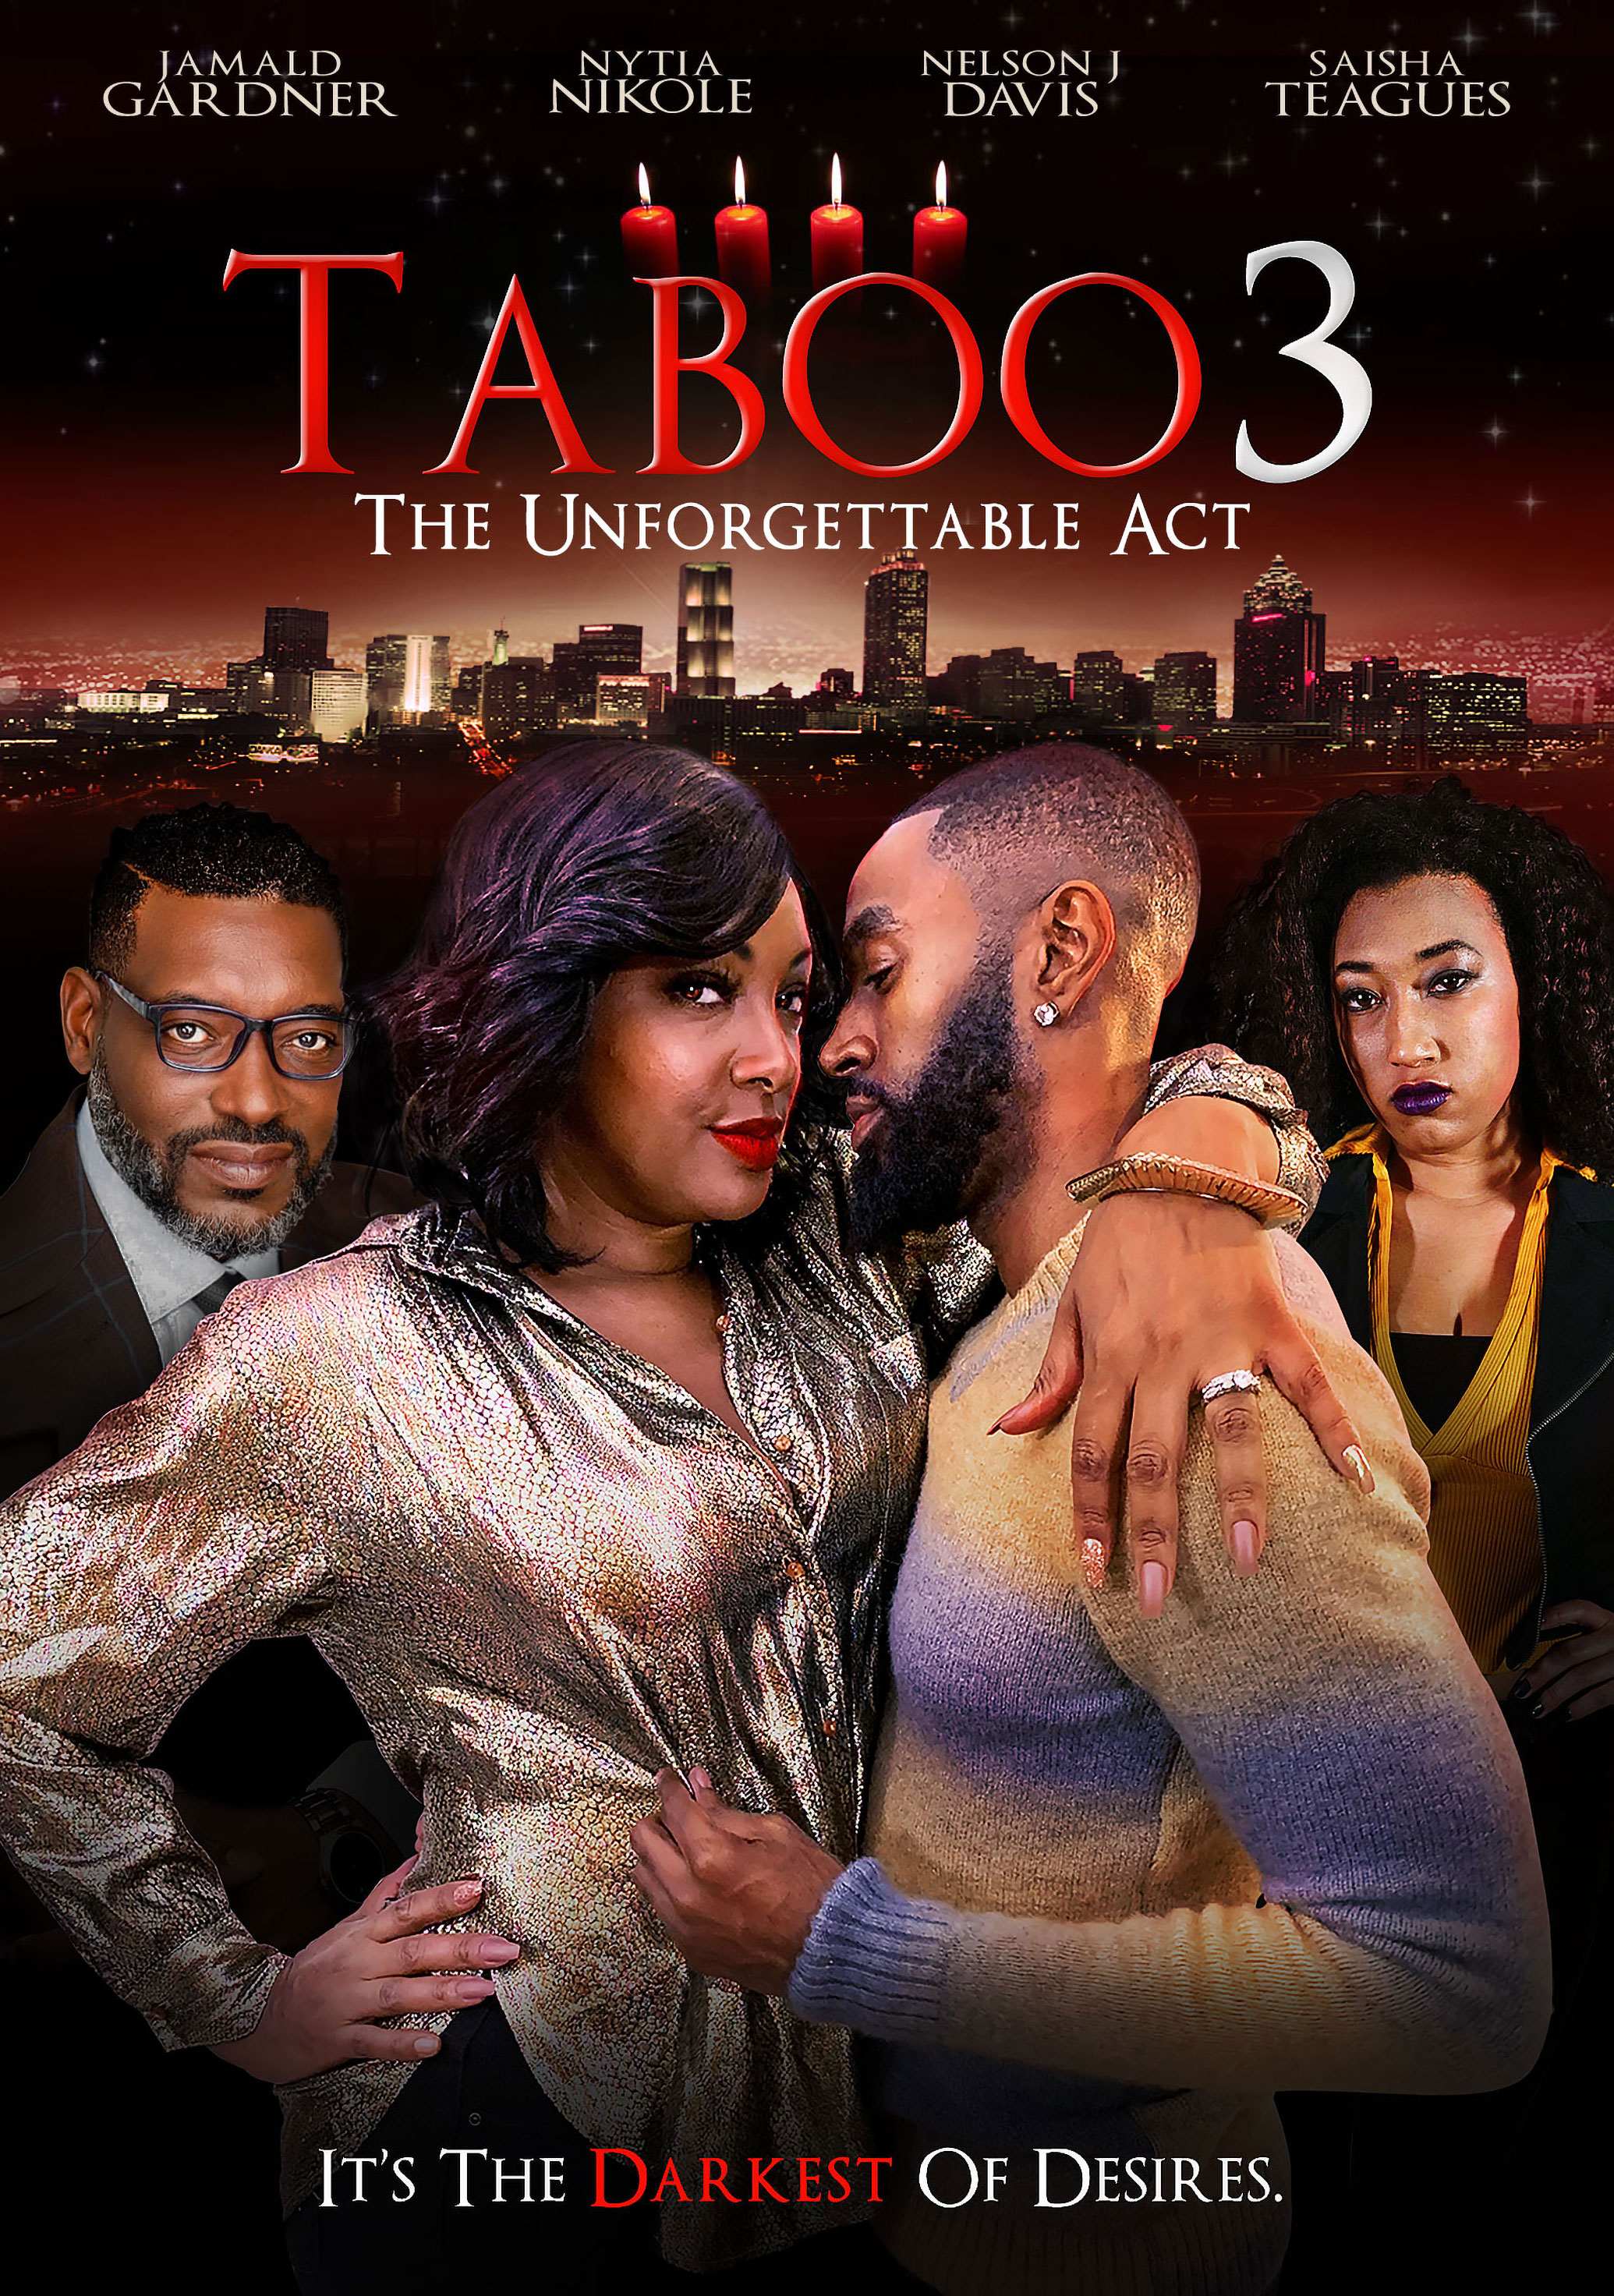 Taboo 3: the unforgettable act